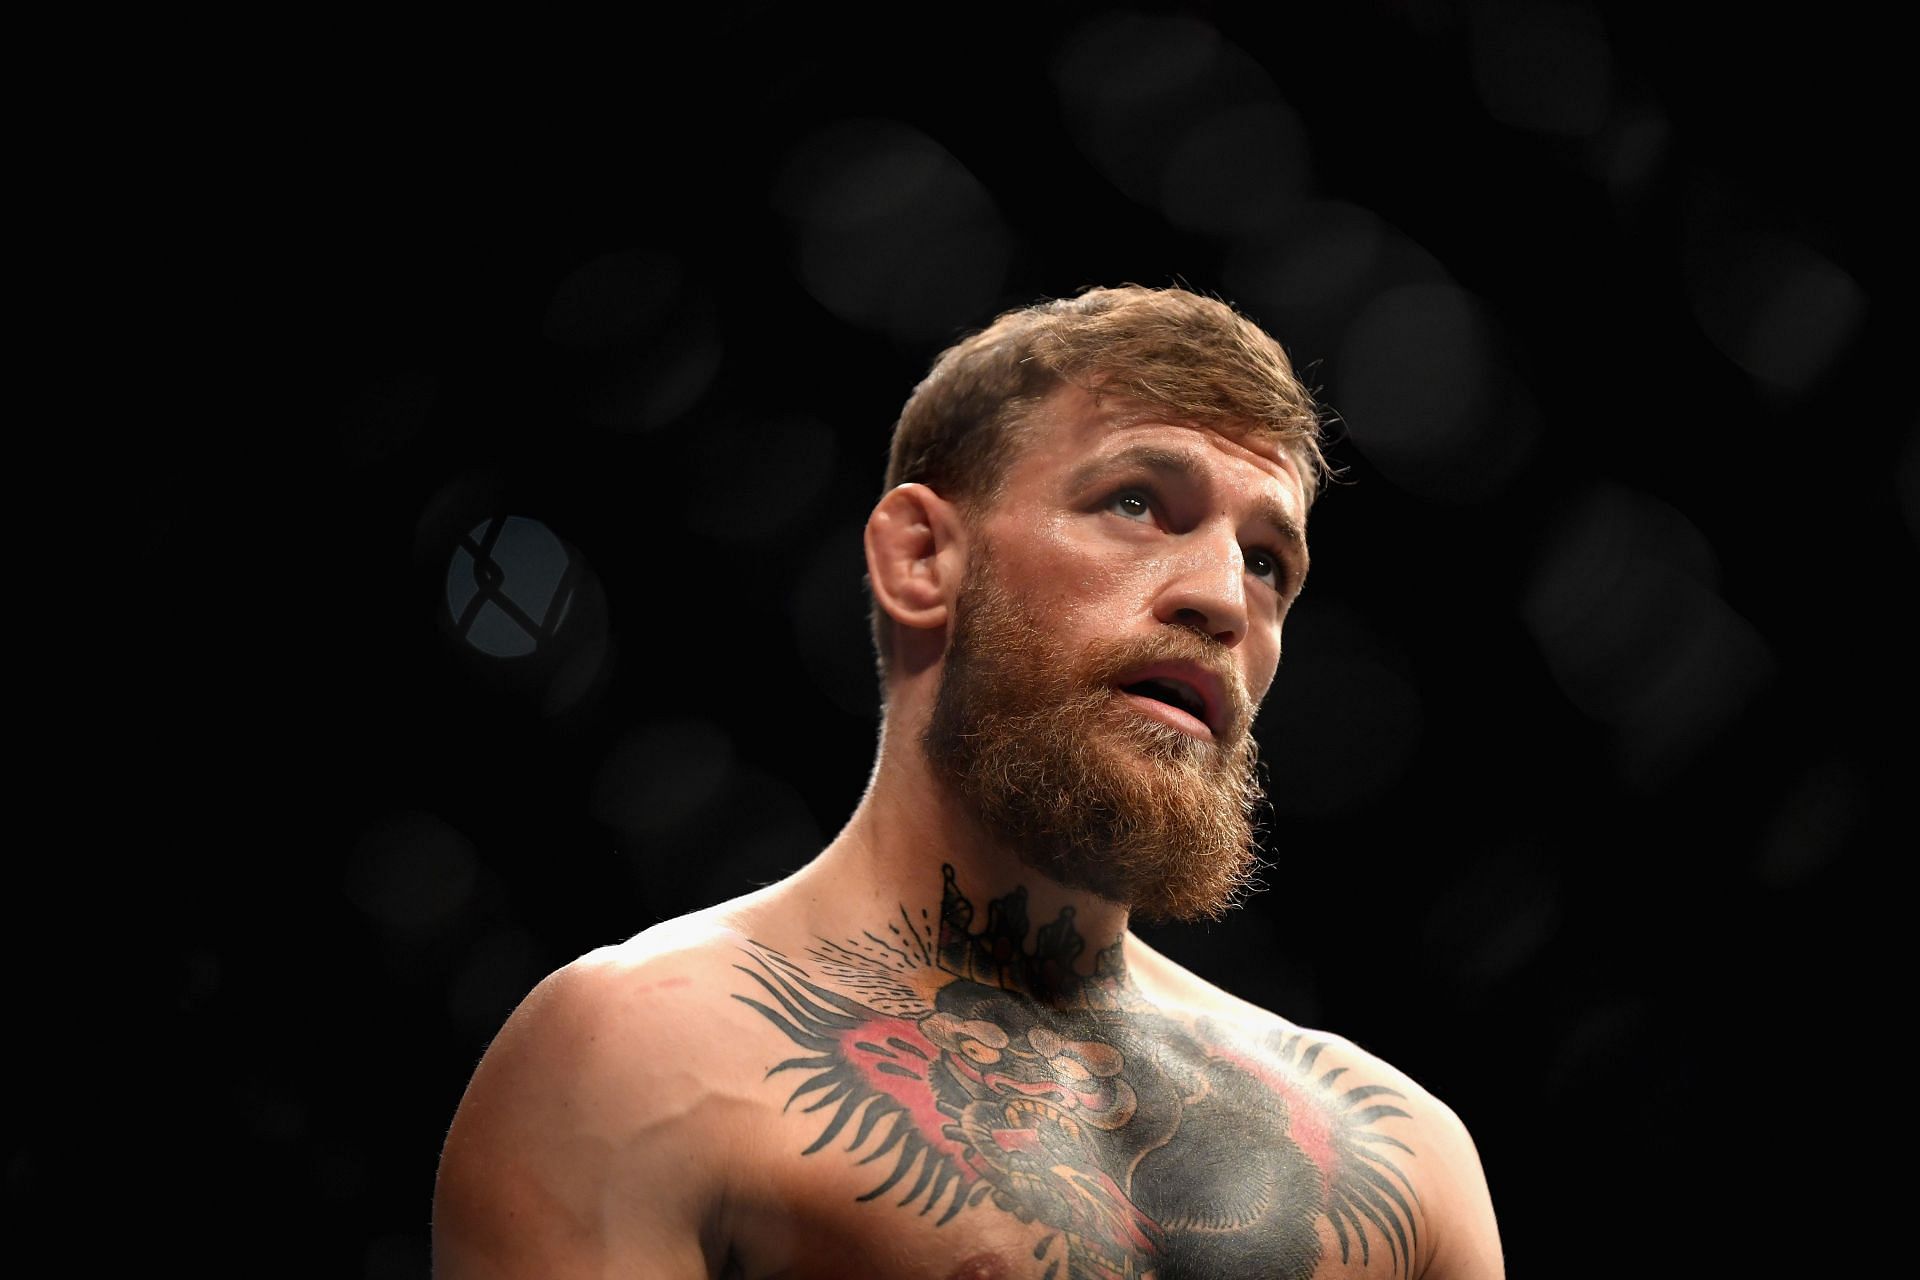 McGregor has stated his intention to return in 2022